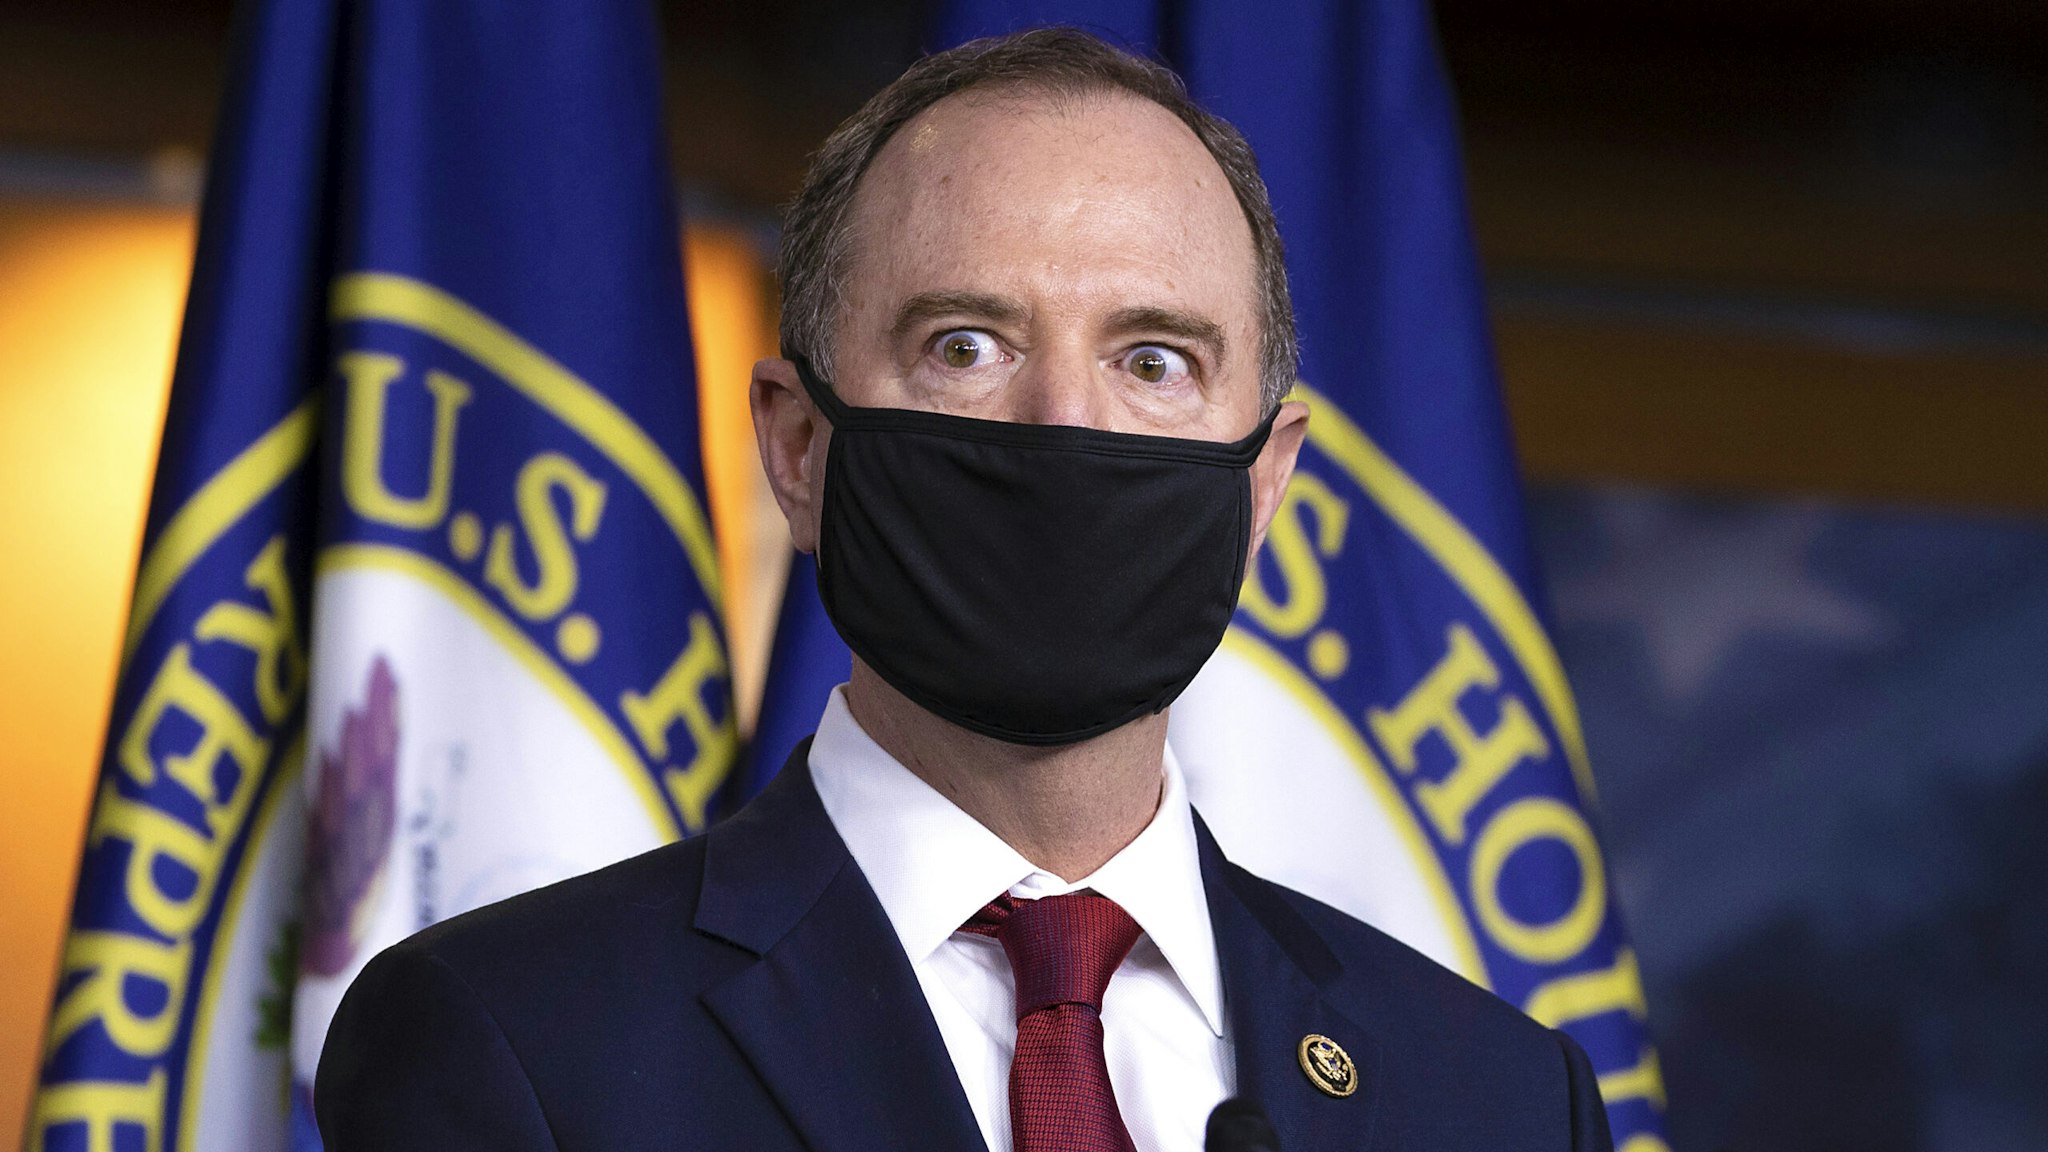 WASHINGTON, DC - JUNE 30: Rep. Adam Schiff (D-CA) speaks at a press conference on Capitol Hill on June 30, 2020 in Washington, DC. House Democrats attended a briefing at the White House this morning following allegations that Russia paid bounties to Taliban militants to kill U.S. and allied troops.